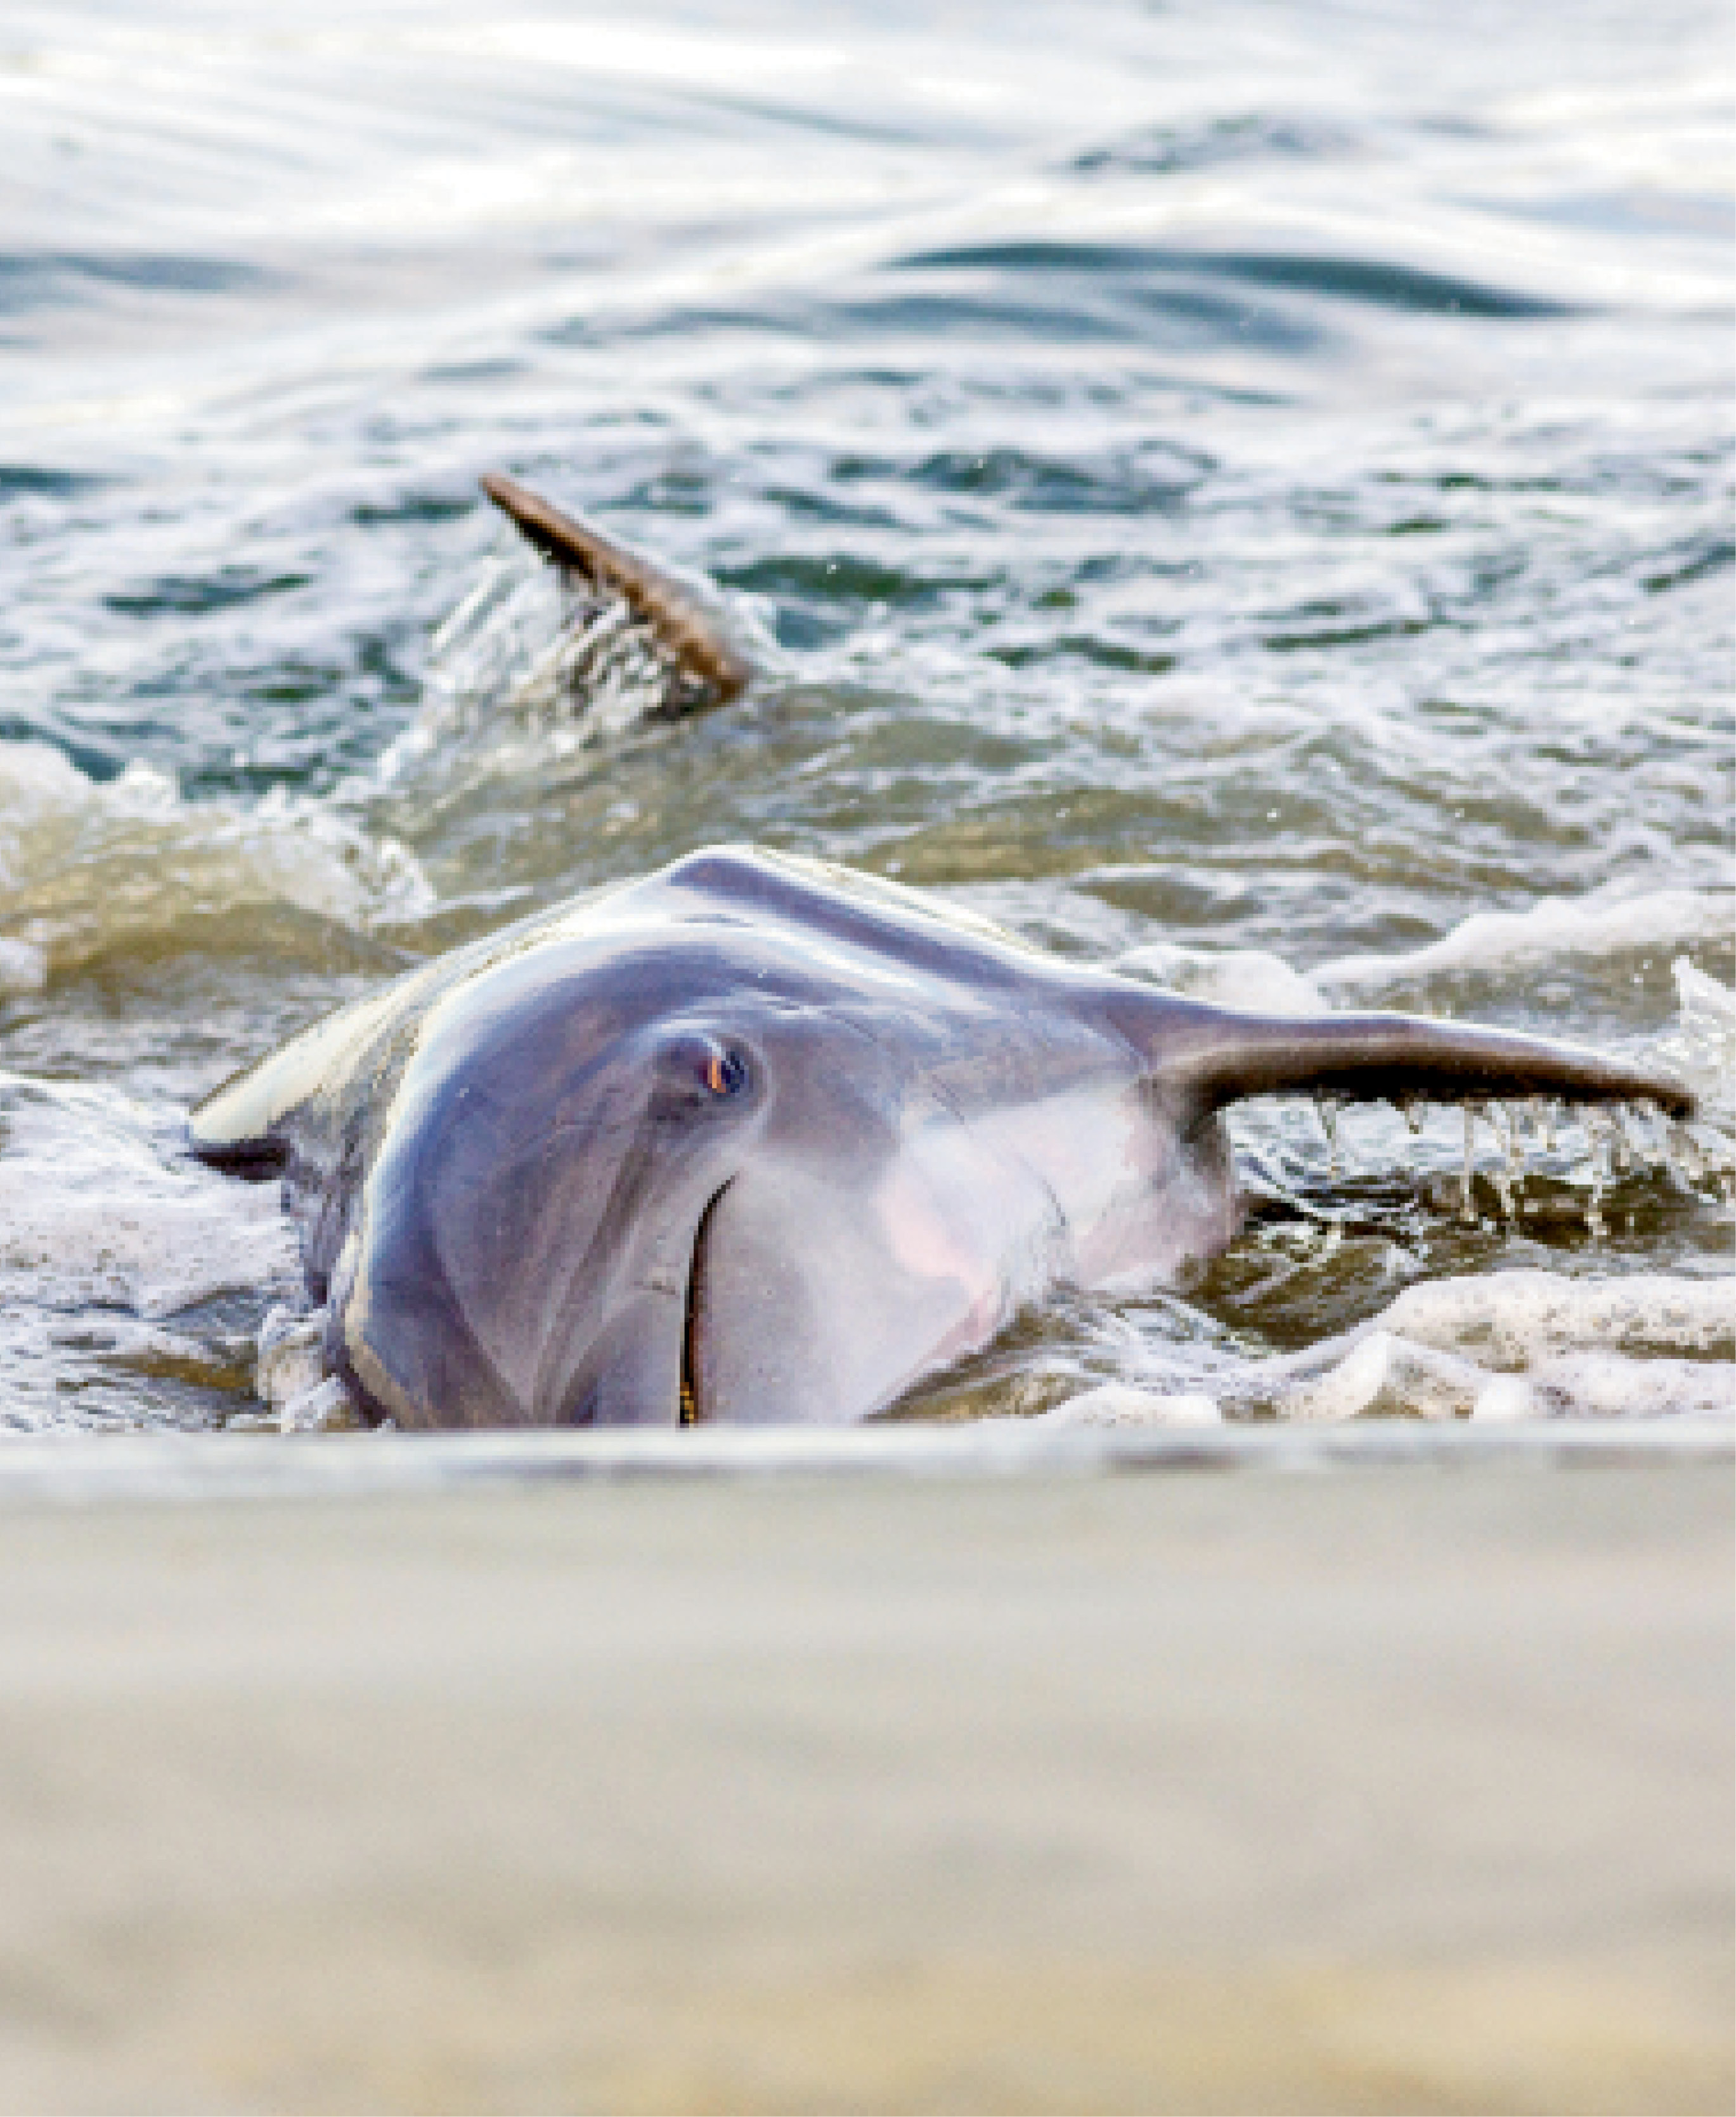 “Strand feeding is a unique learned behavior, and Charleston is one of the few places in the world where dolphins are known to do it.”  —Lauren Rust, Lowcountry Marine Mammal Network